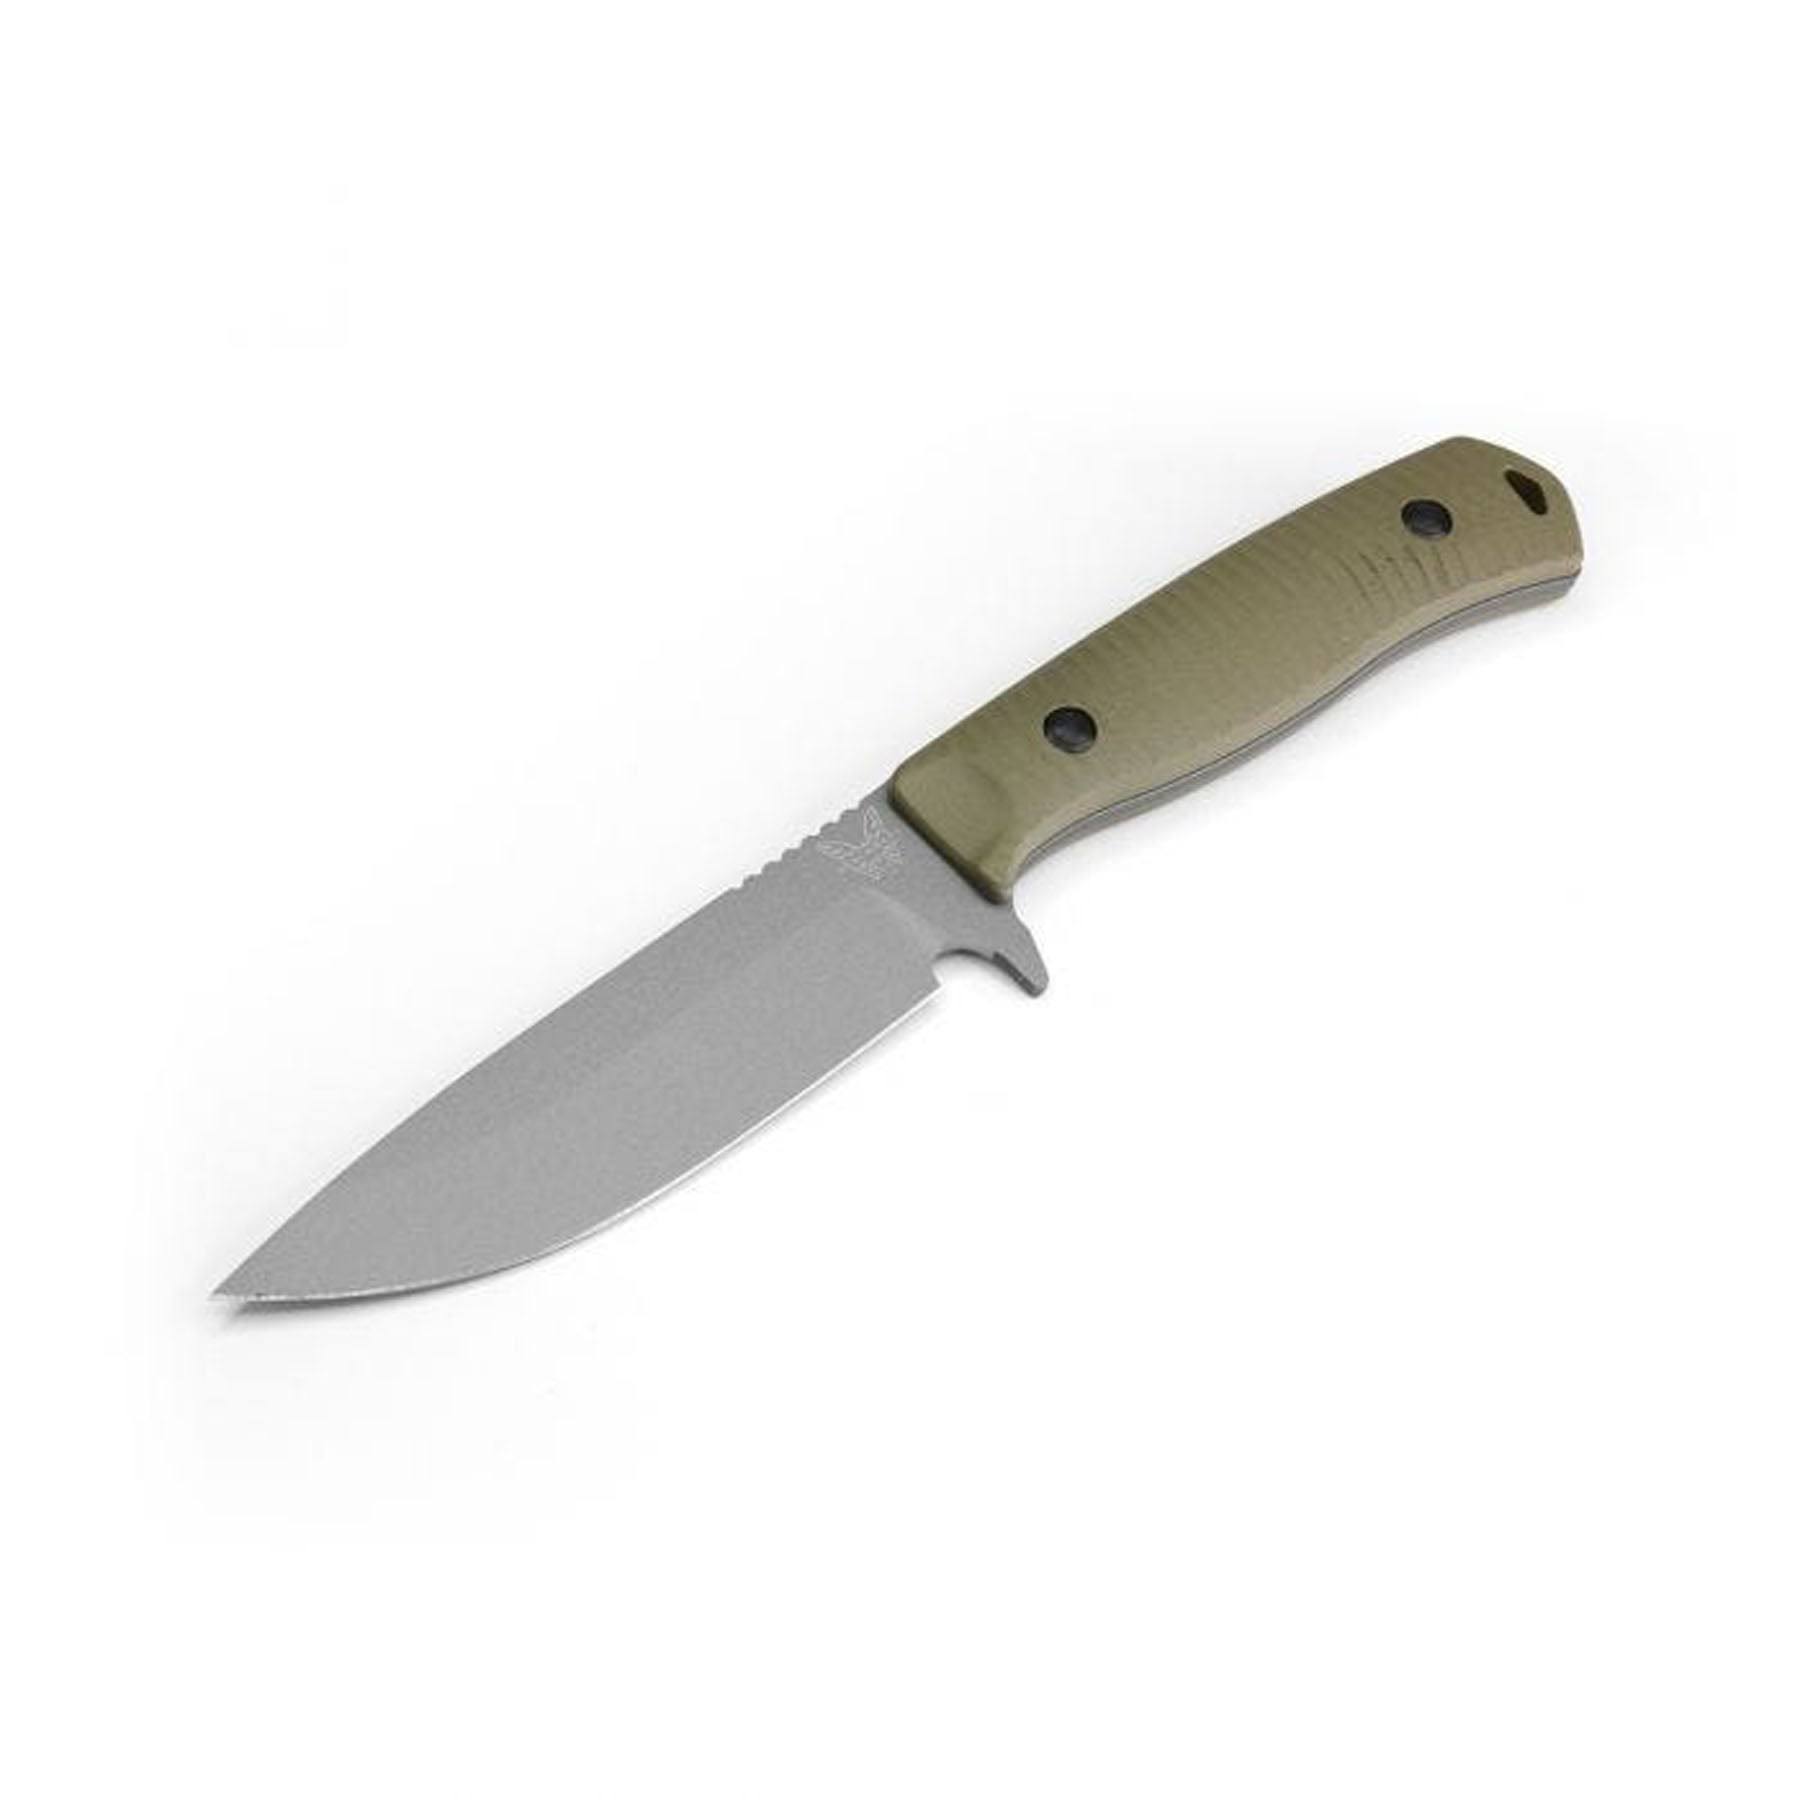 Benchmade Anonimus CruWear 539GY survival knife